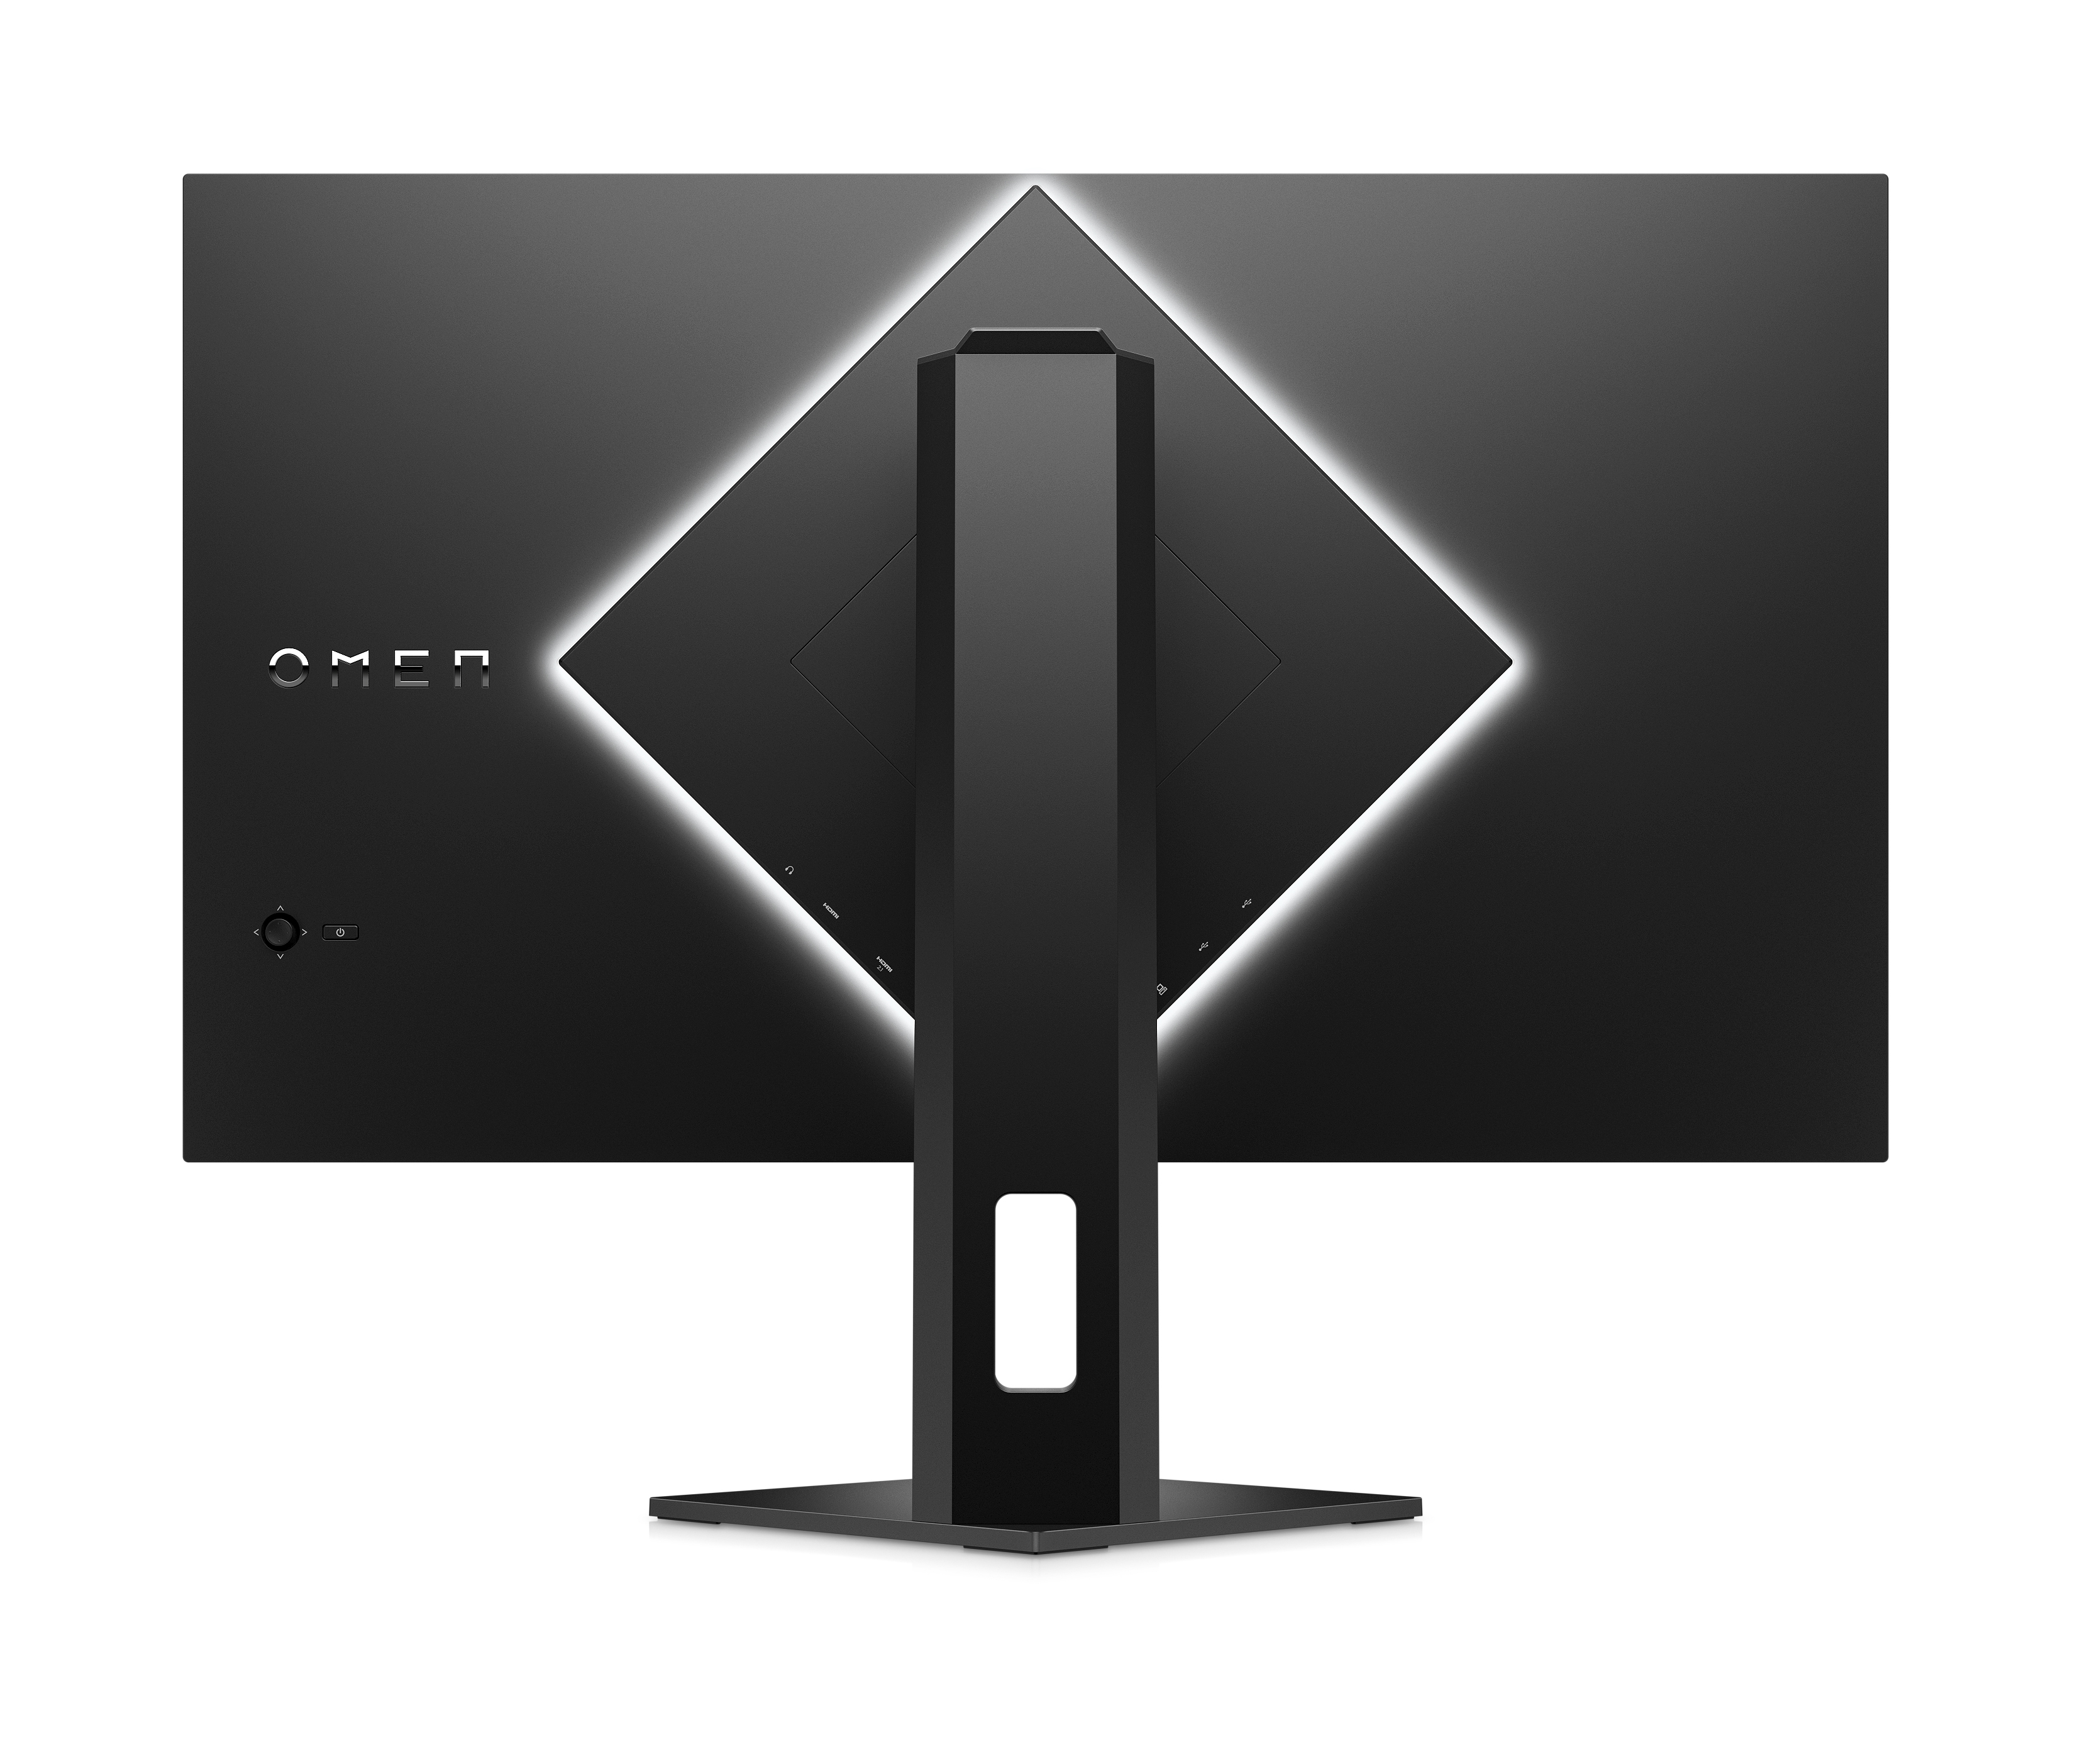 OMEN diamond shaped ARGB lighting on the rear adds spectacular ambiance to any setup and comes with customizable animations and themes that can sync your entire ecosystem via OMEN Light Studio.